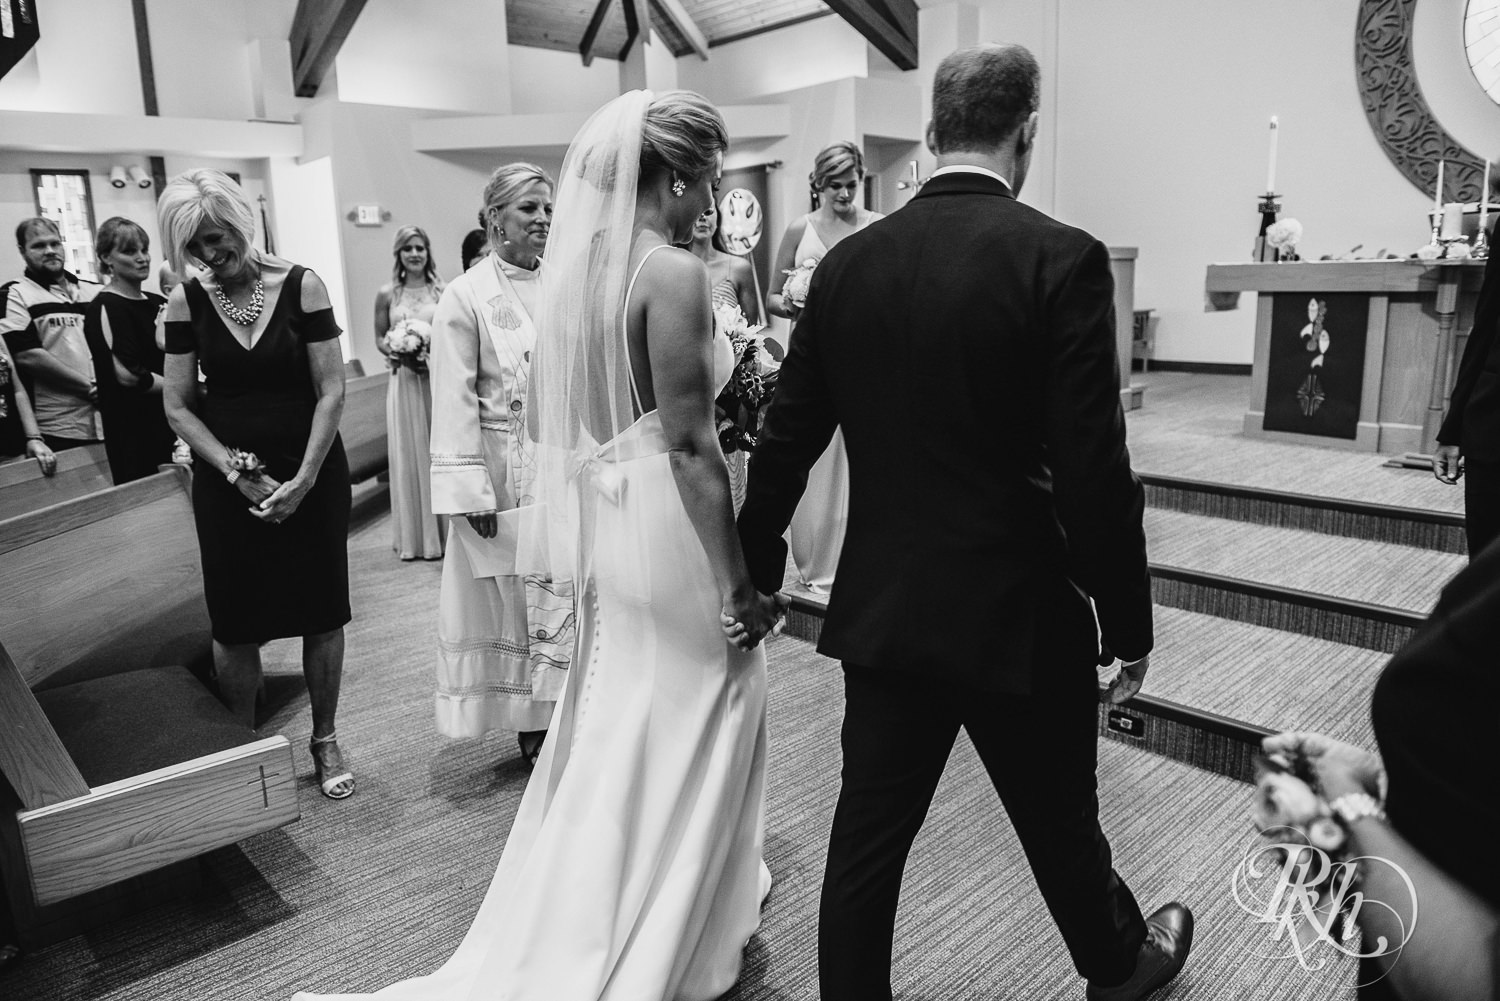 Bride and groom hold hands during a church wedding ceremony in Minneapolis, Minnesota.